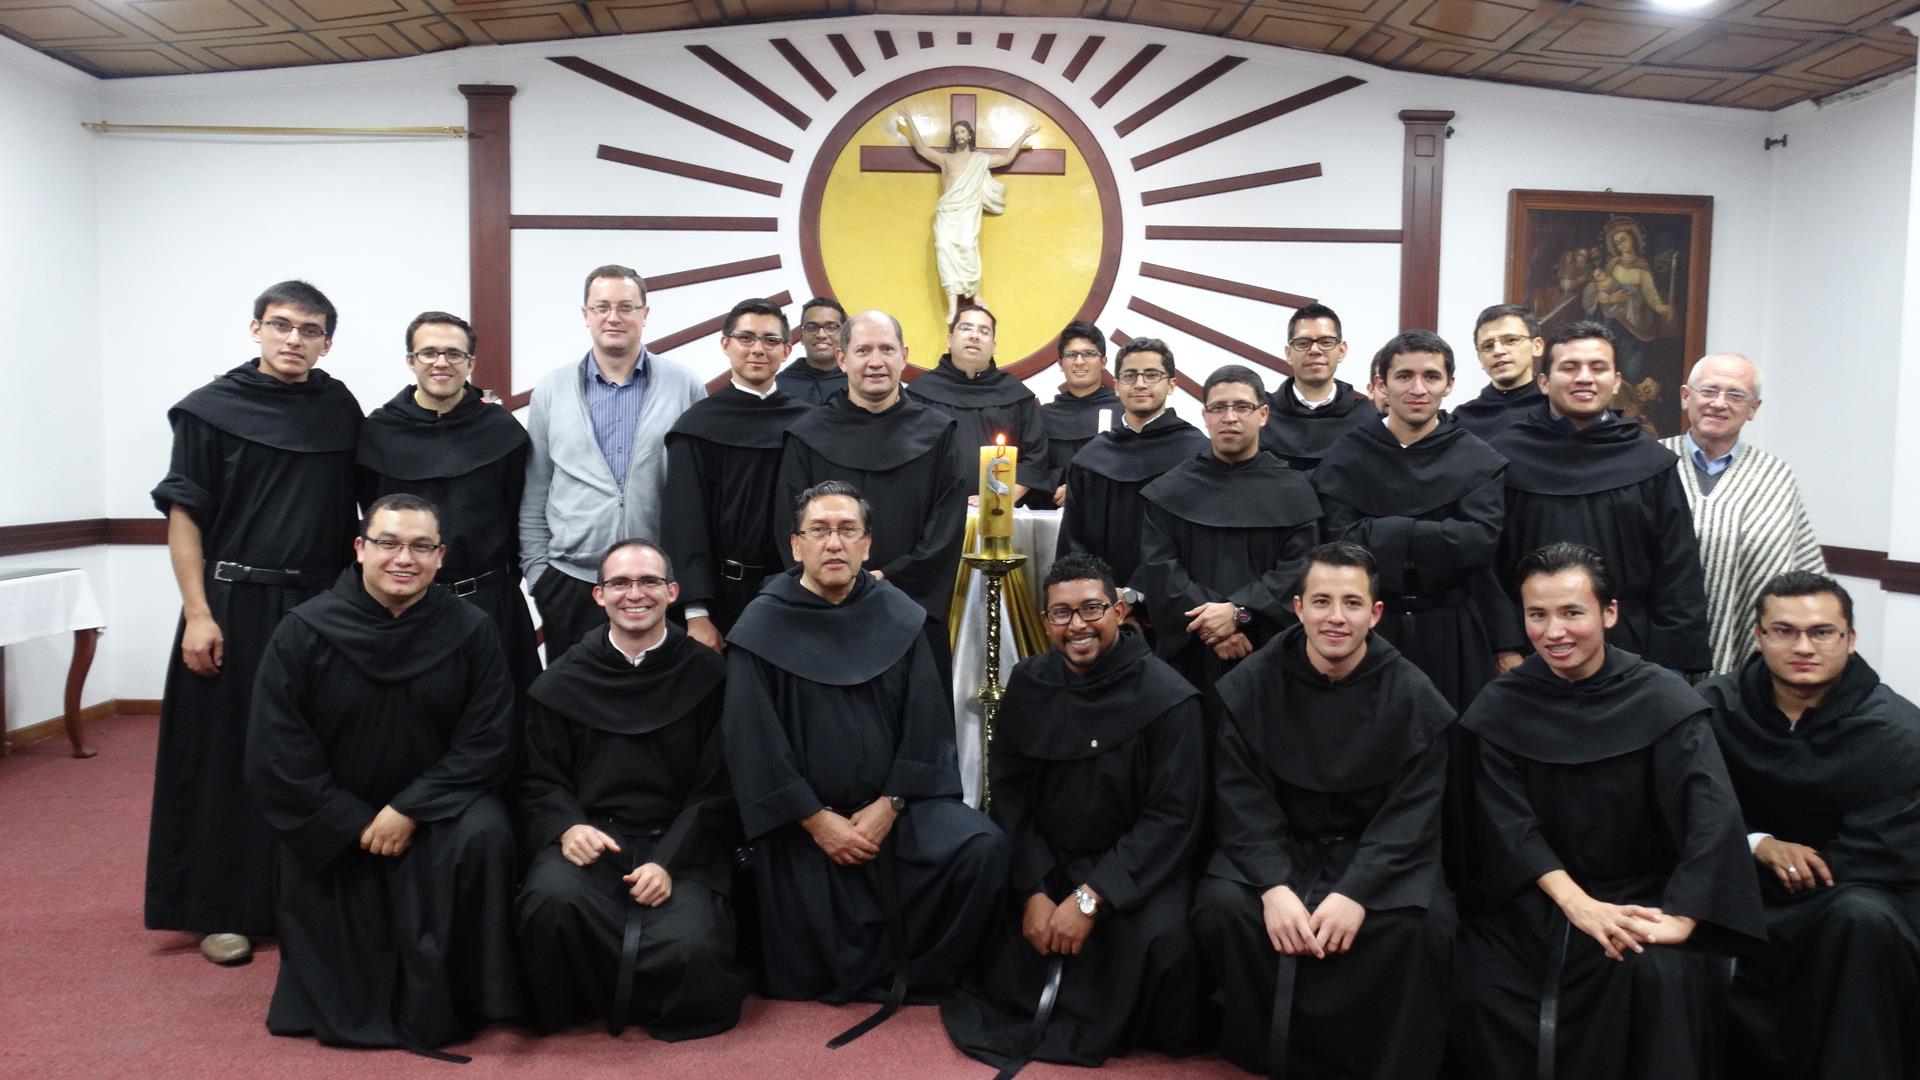 Francisco Javier Monroy, president of the General Secretariat of Spirituality and Formation, meets in Colombia with the formation teams of the provinces of Our Lady of Consolation and Our Lady of Candelaria